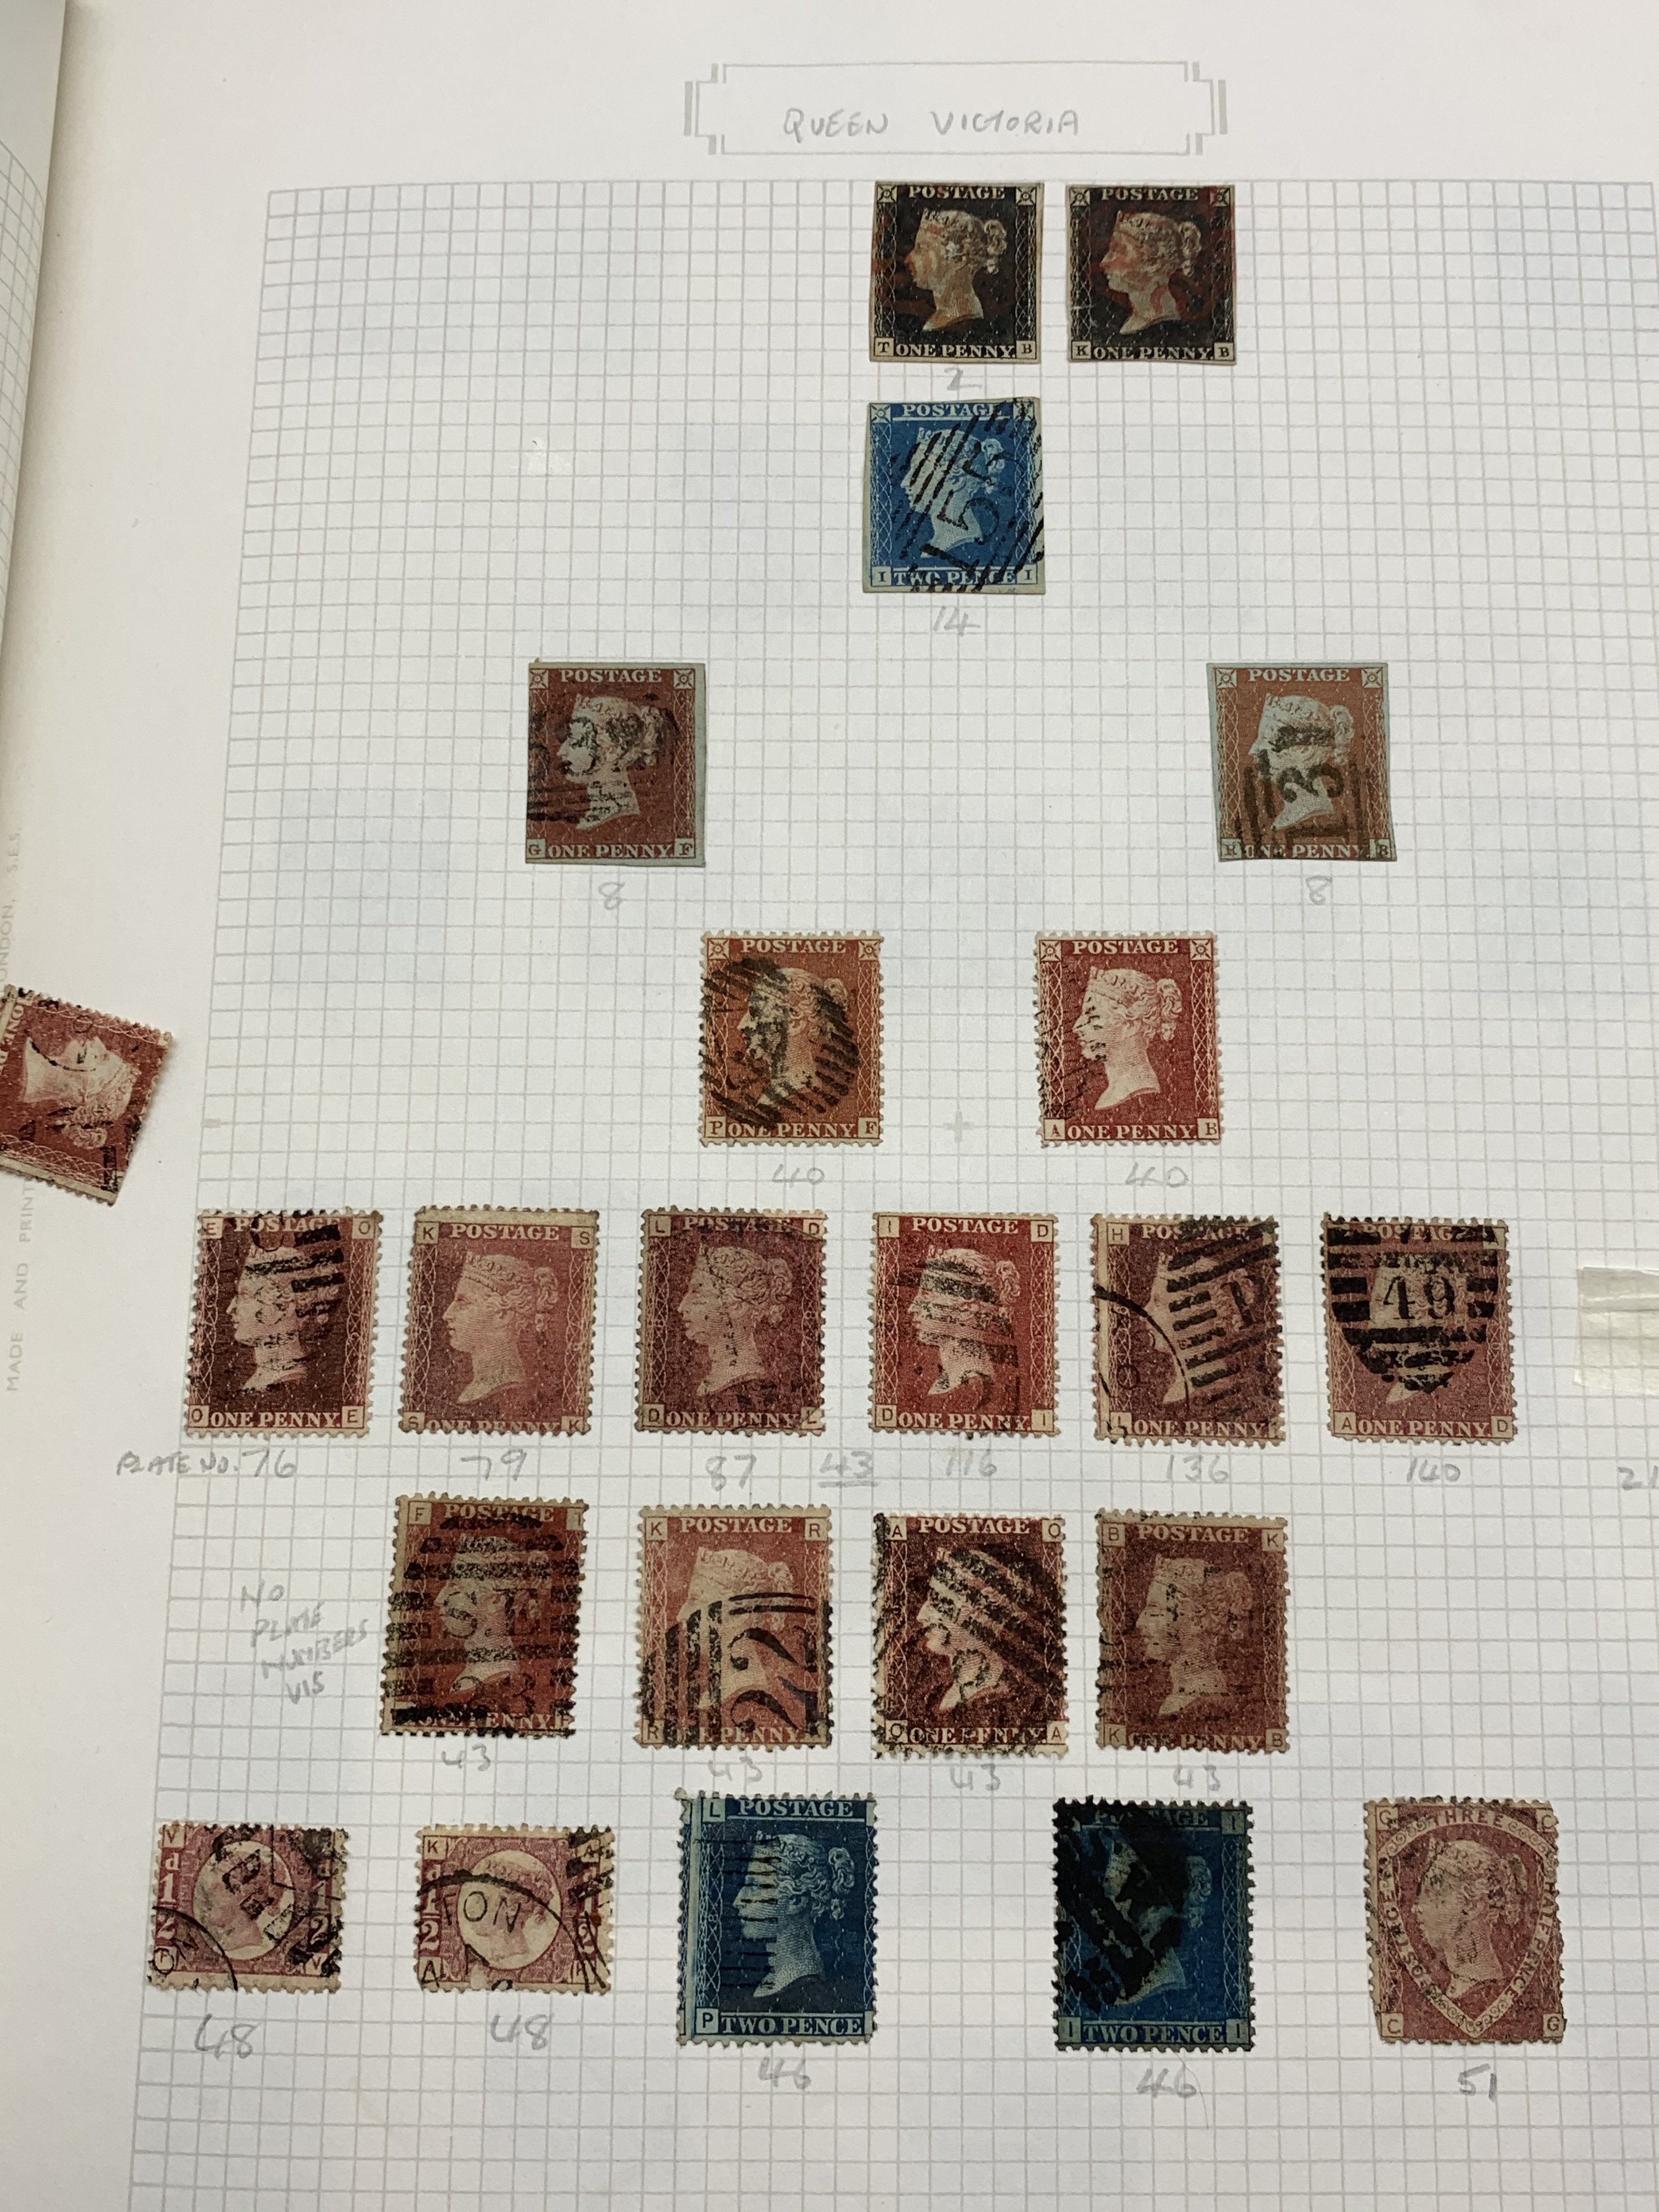 Collection of Queen Victoria and later Great British and World stamps including two QV penny black - Image 2 of 2